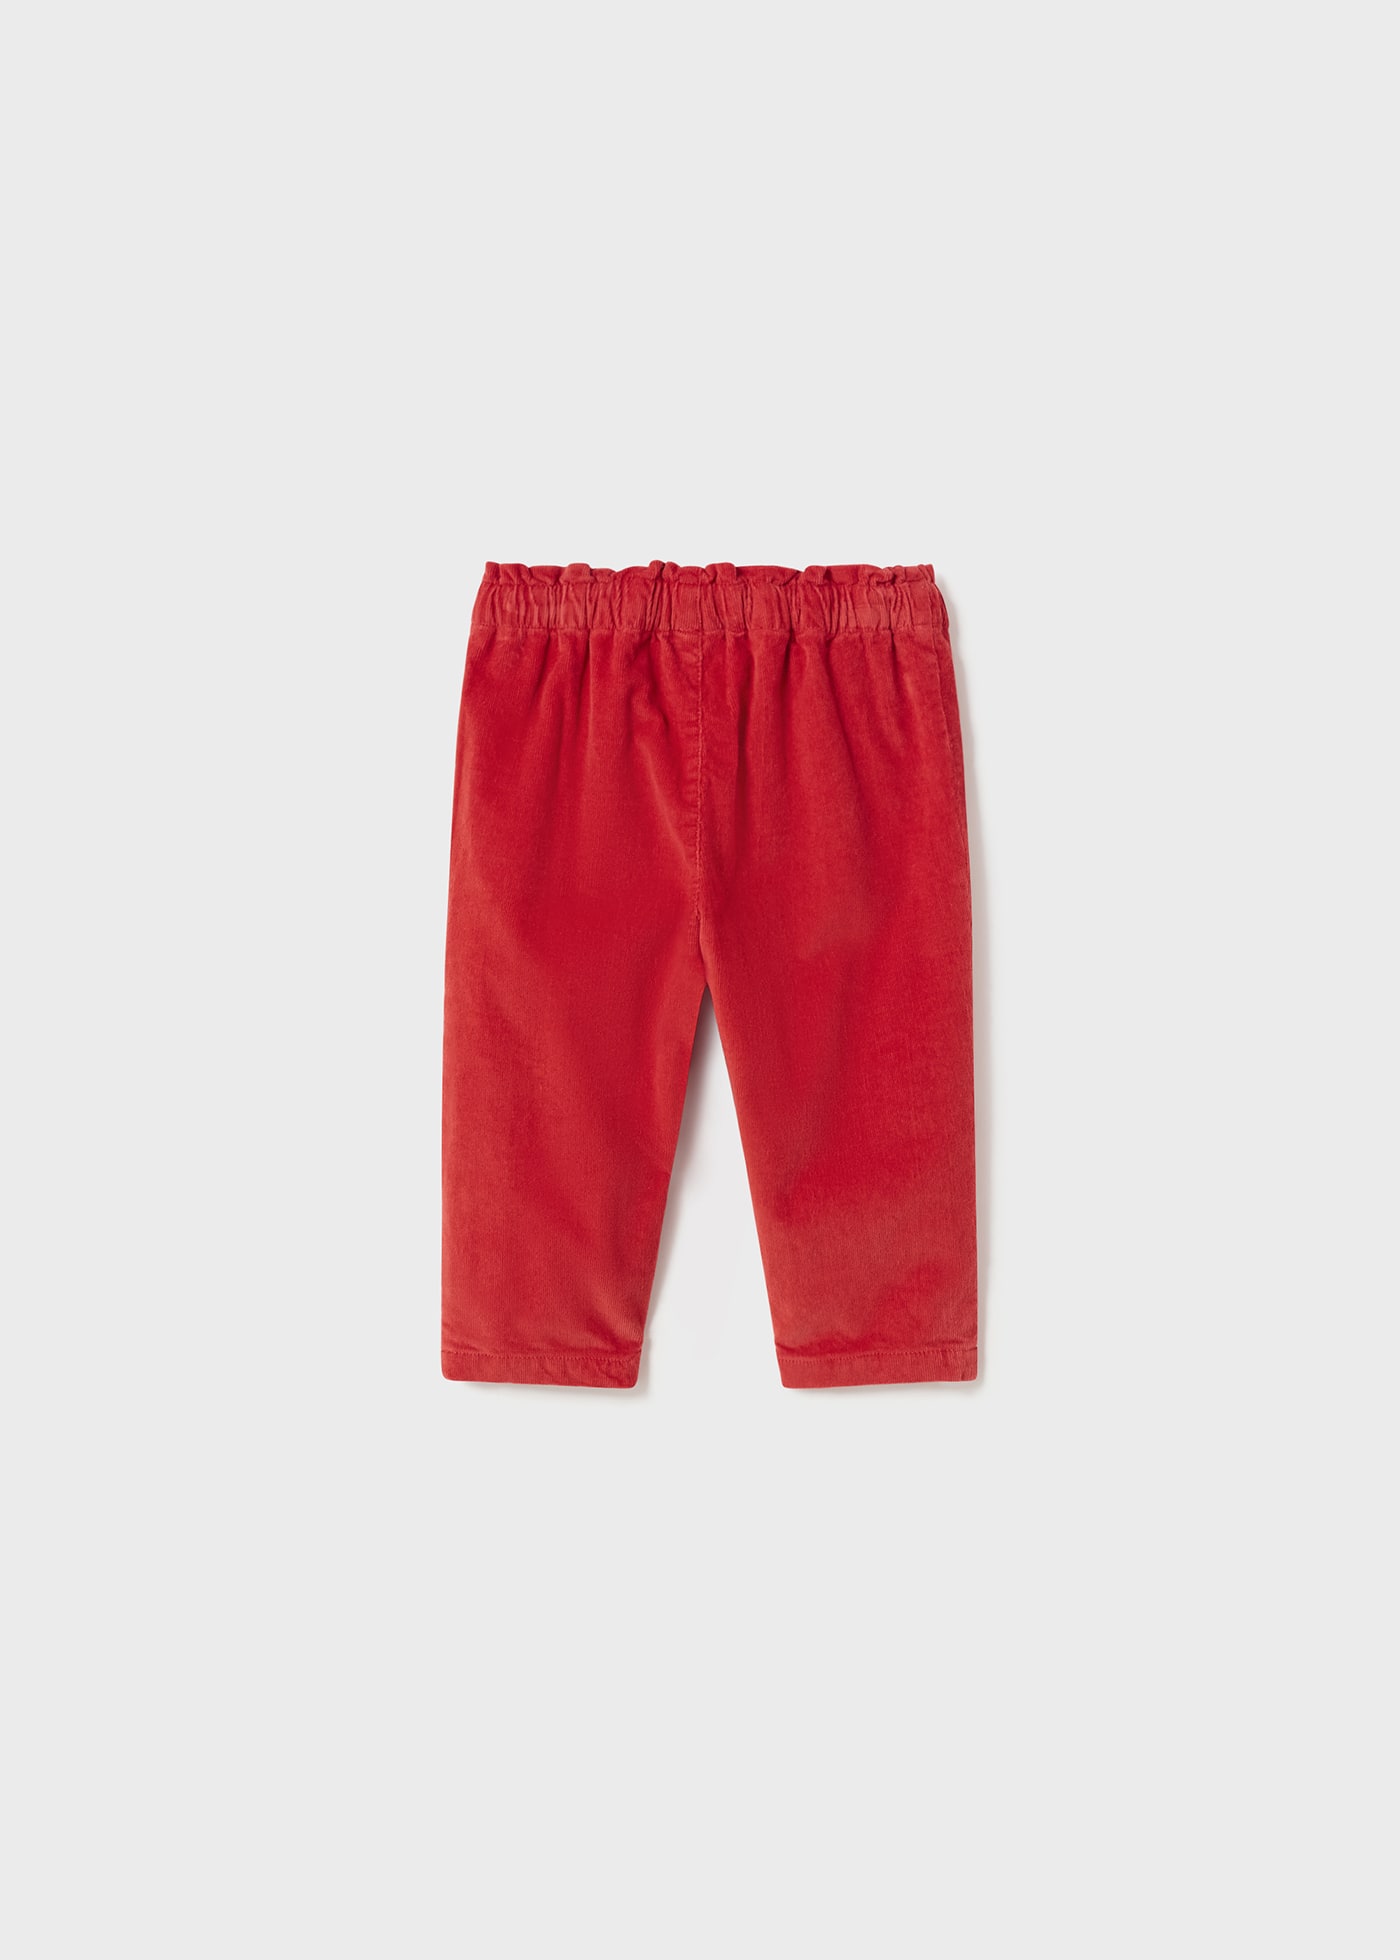 Cordhose Slouchy Baby